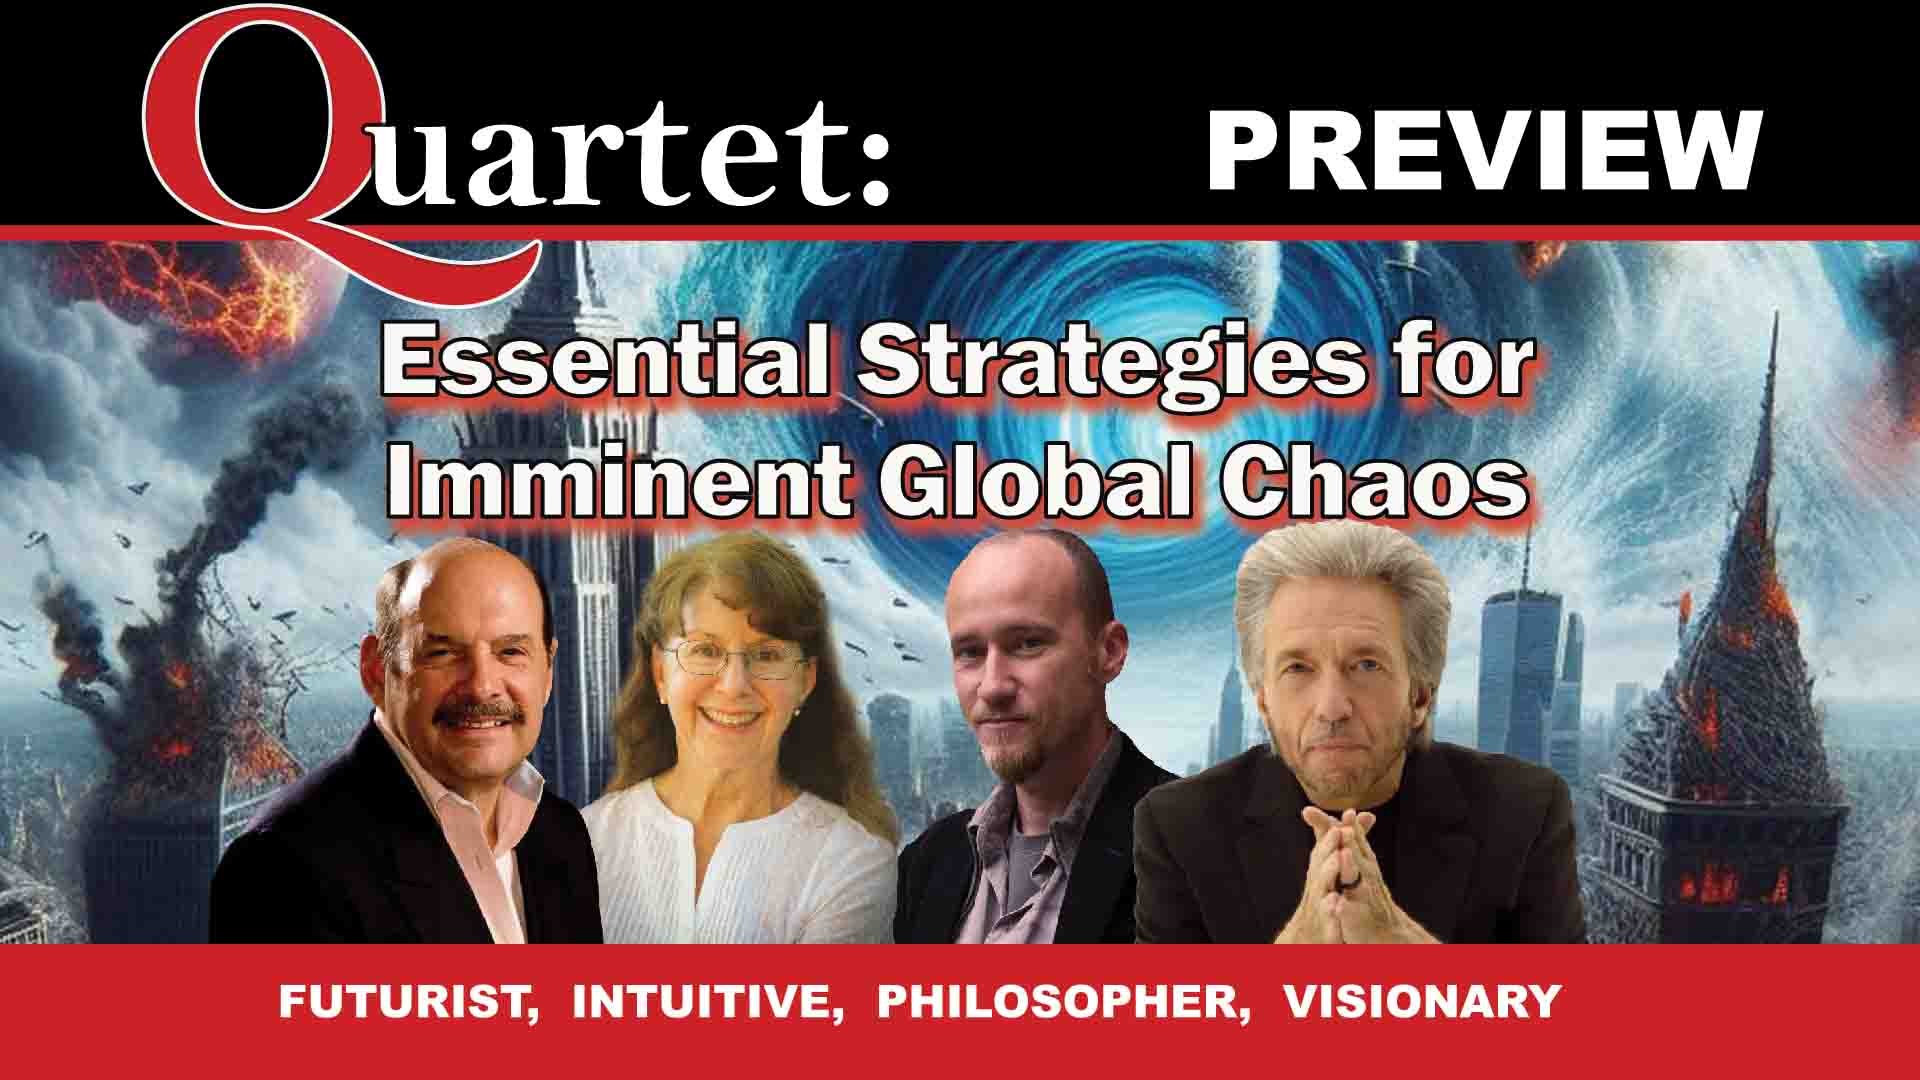 Quartet Preview - Essential Strategies for Imminent Global Chaos